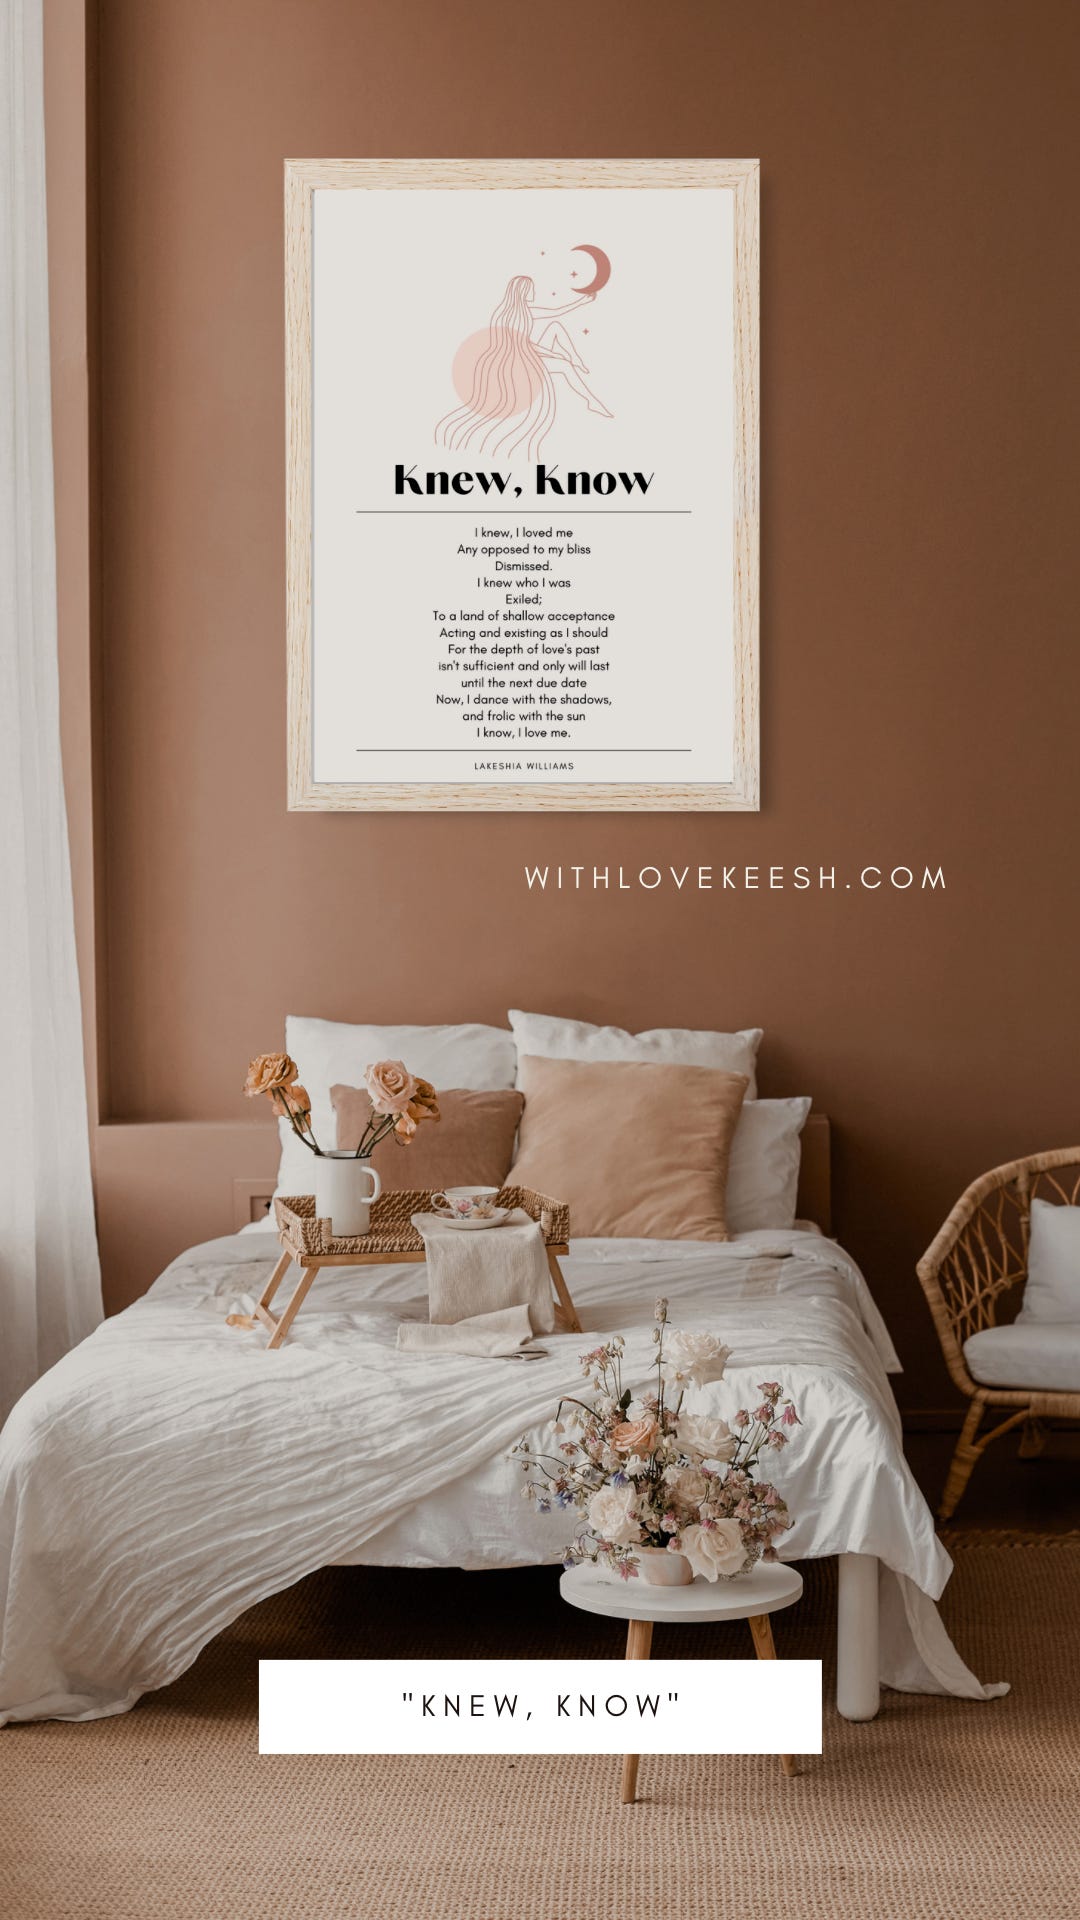 https://withlovekeesh.com/products/knew-know-printable-poetry-wall-artDear Past Self A Love Letter to your past mistakes: Being gentle with yourself as you steadily evolve in life 